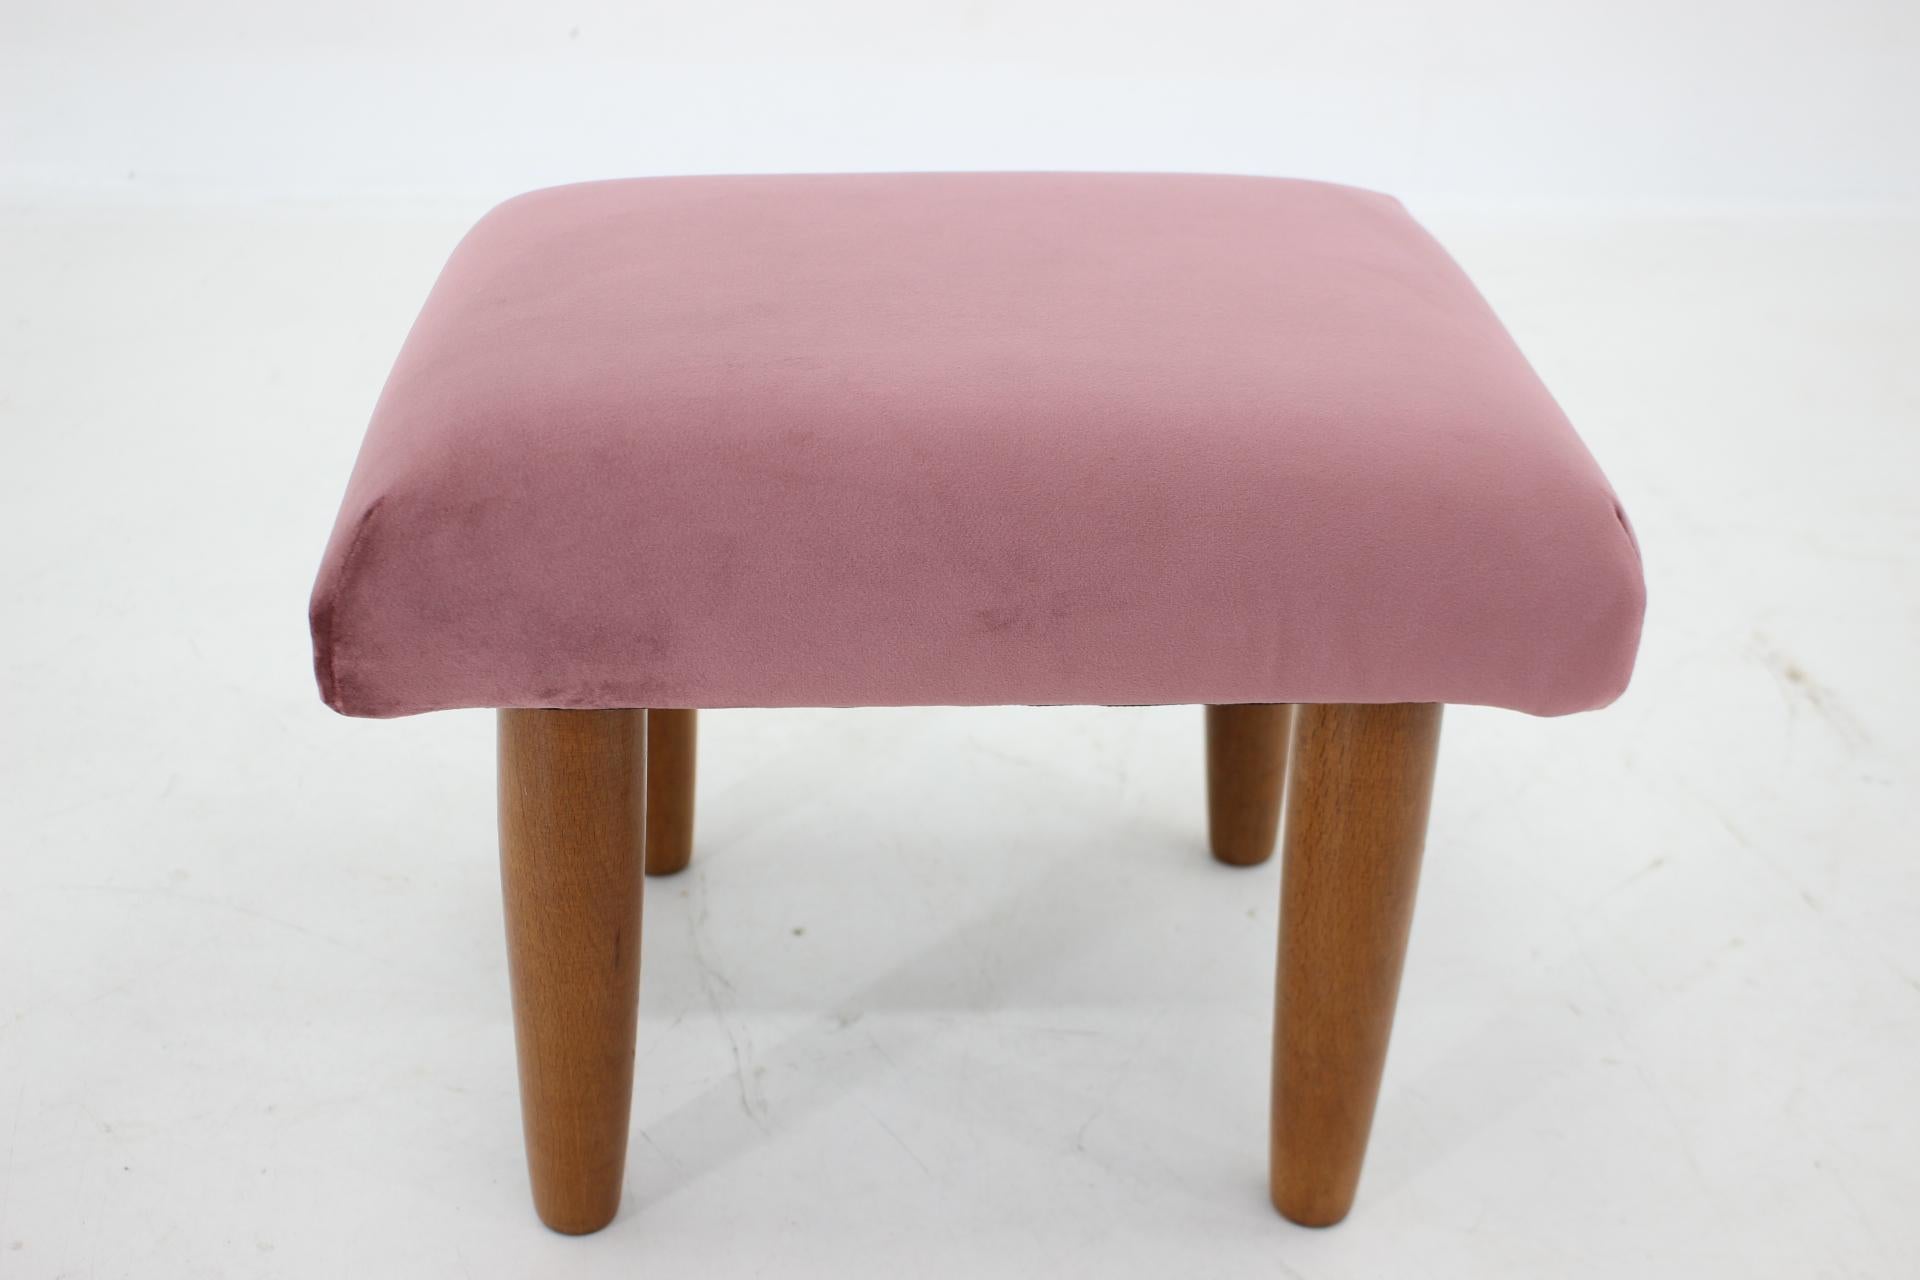 - Newly upholstered 
- Repolished